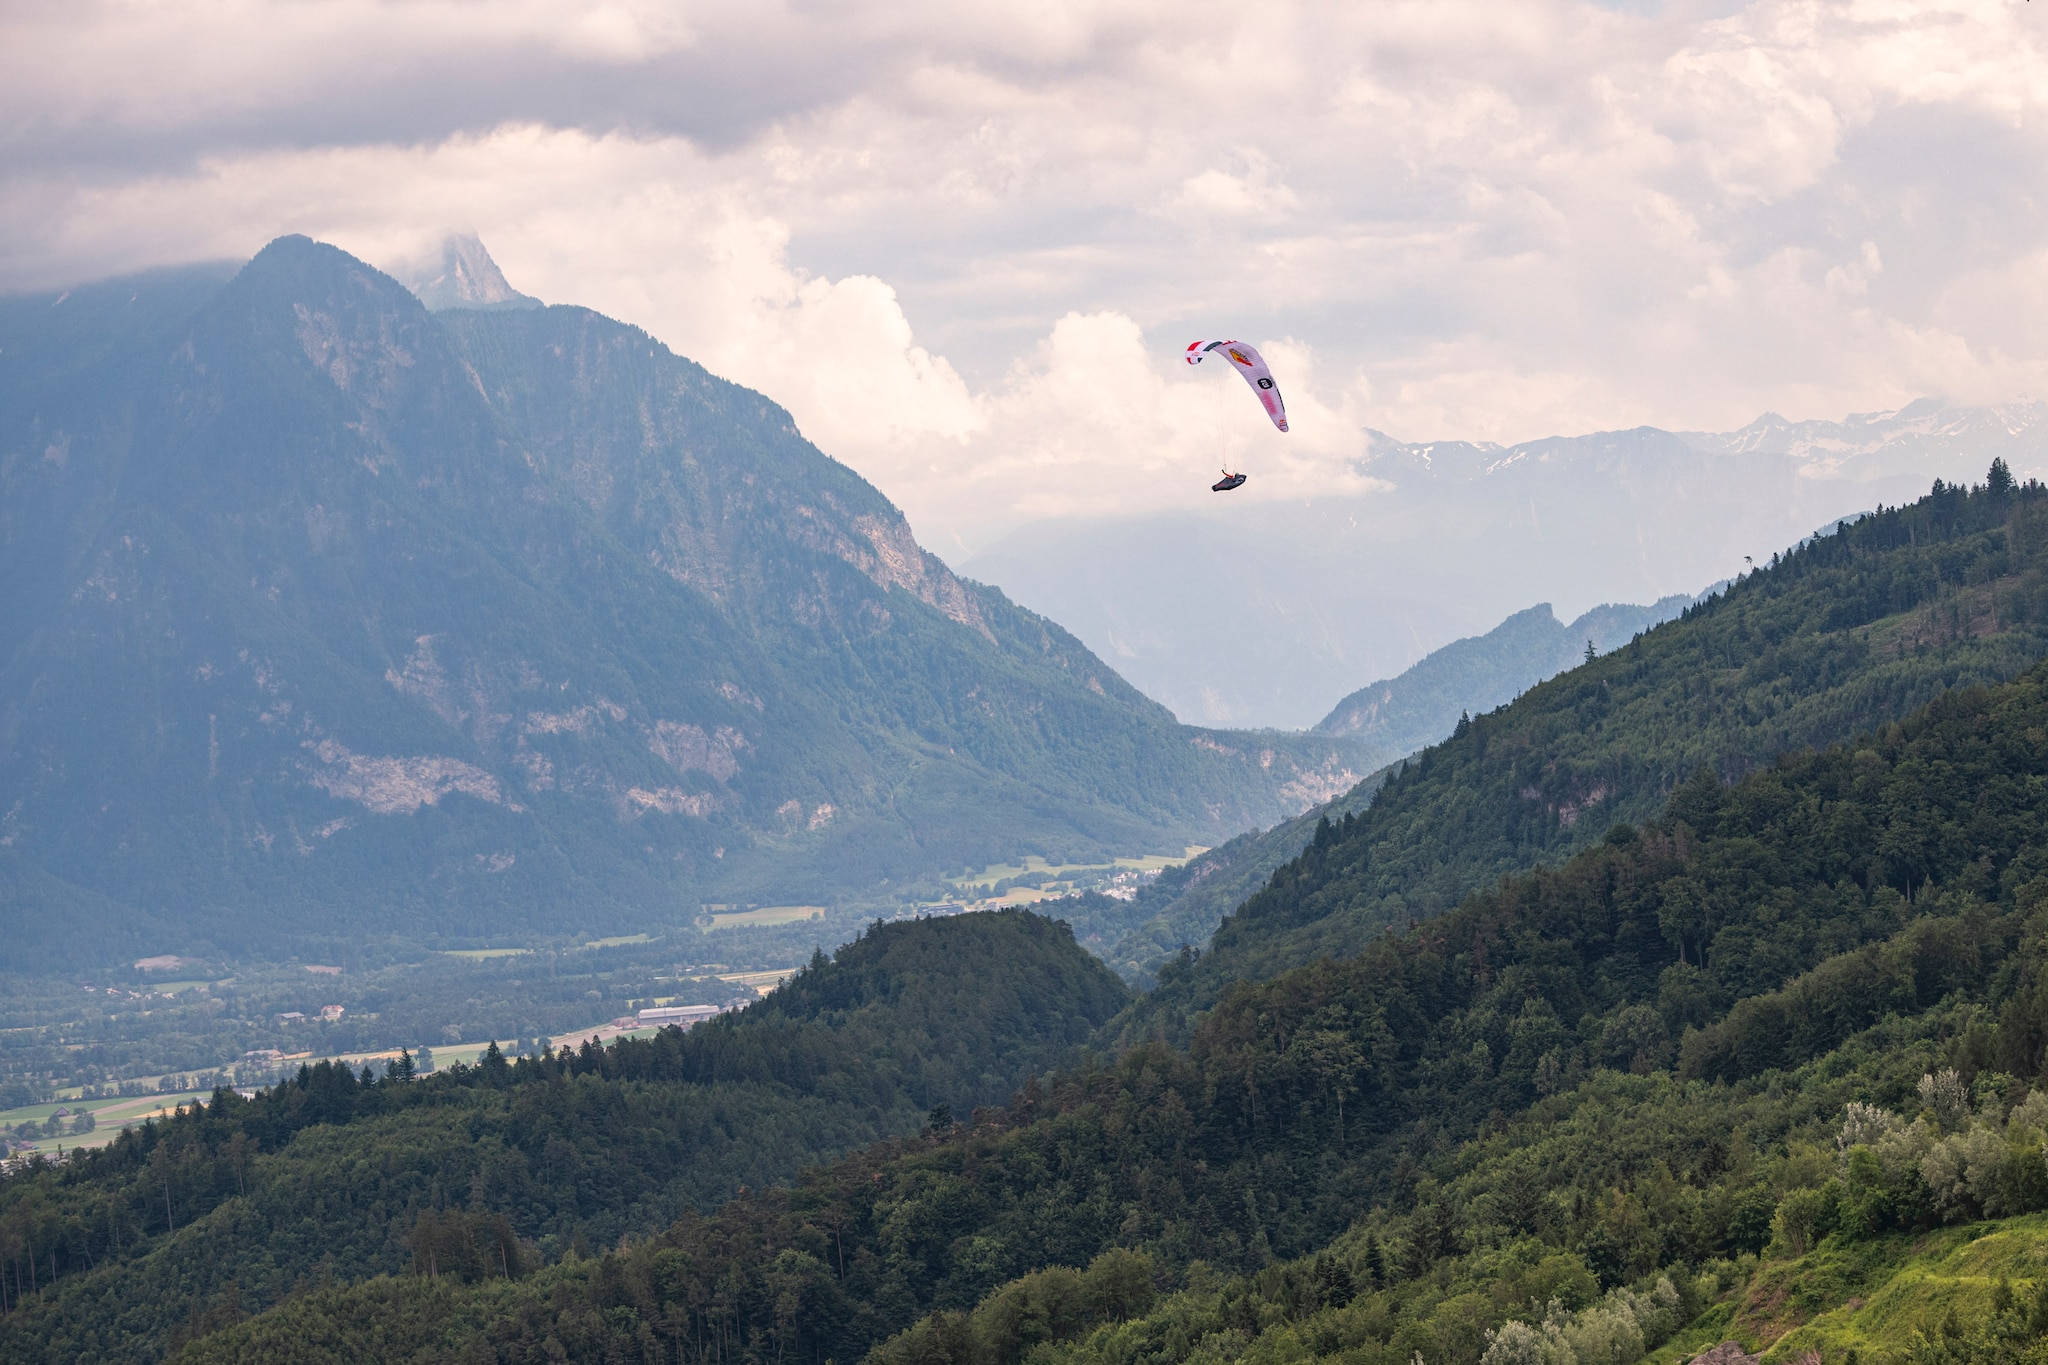 Simon Oberrauner (AUT2) performing during the Red Bull X-Alps above the Rheintal / Liechtenstein on 23-June-2021. In this endurance adventure race athletes from 18 nations have to fly with paragliders or hike from Salzburg along the alps towards France, around the Mont Blanc back to Salzburg.